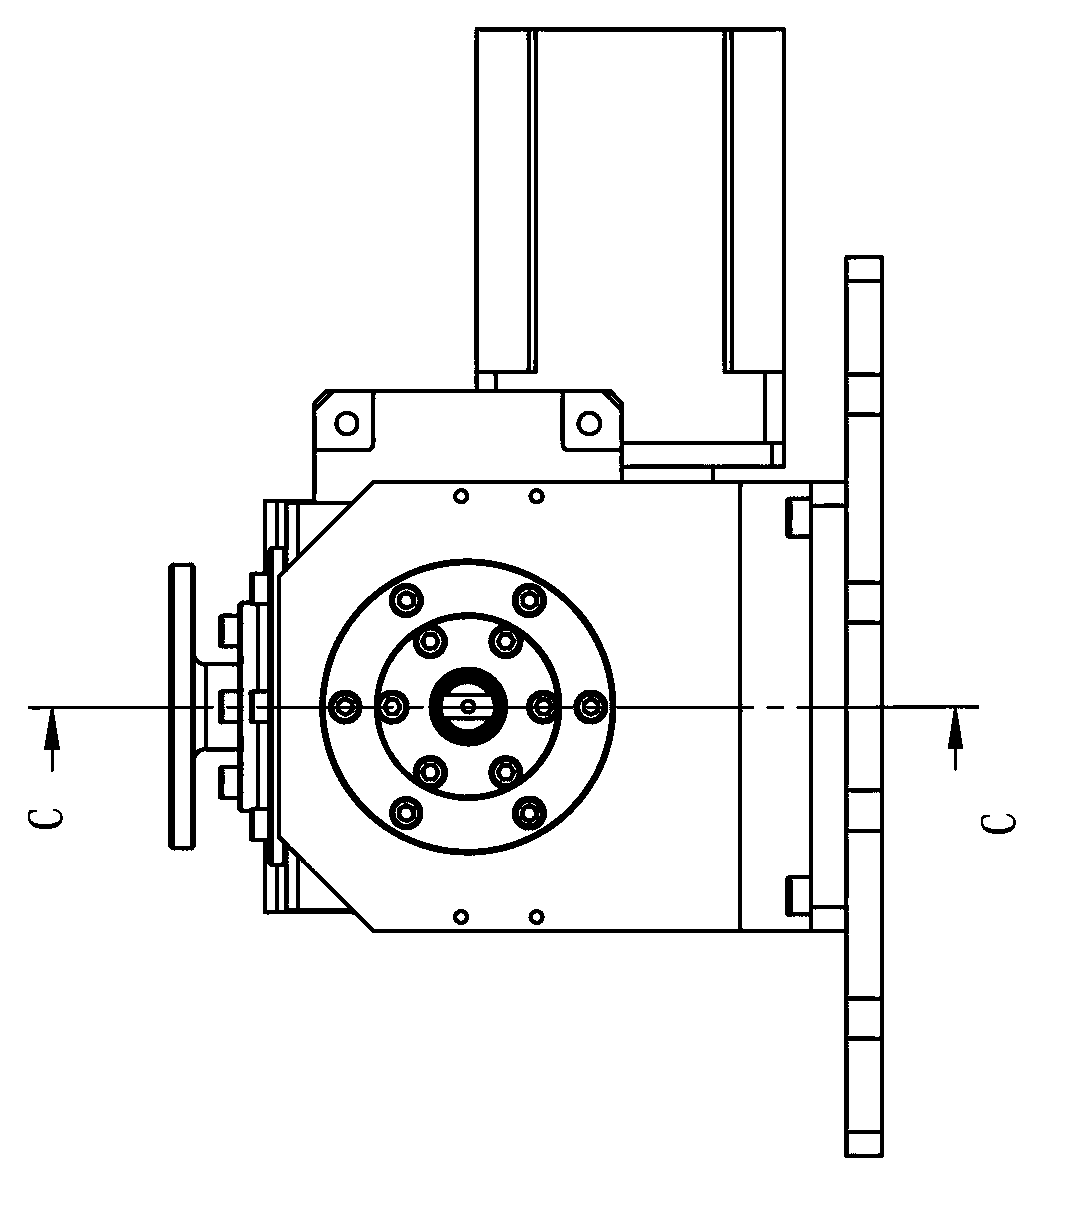 Numerical control double-shaft rotary table